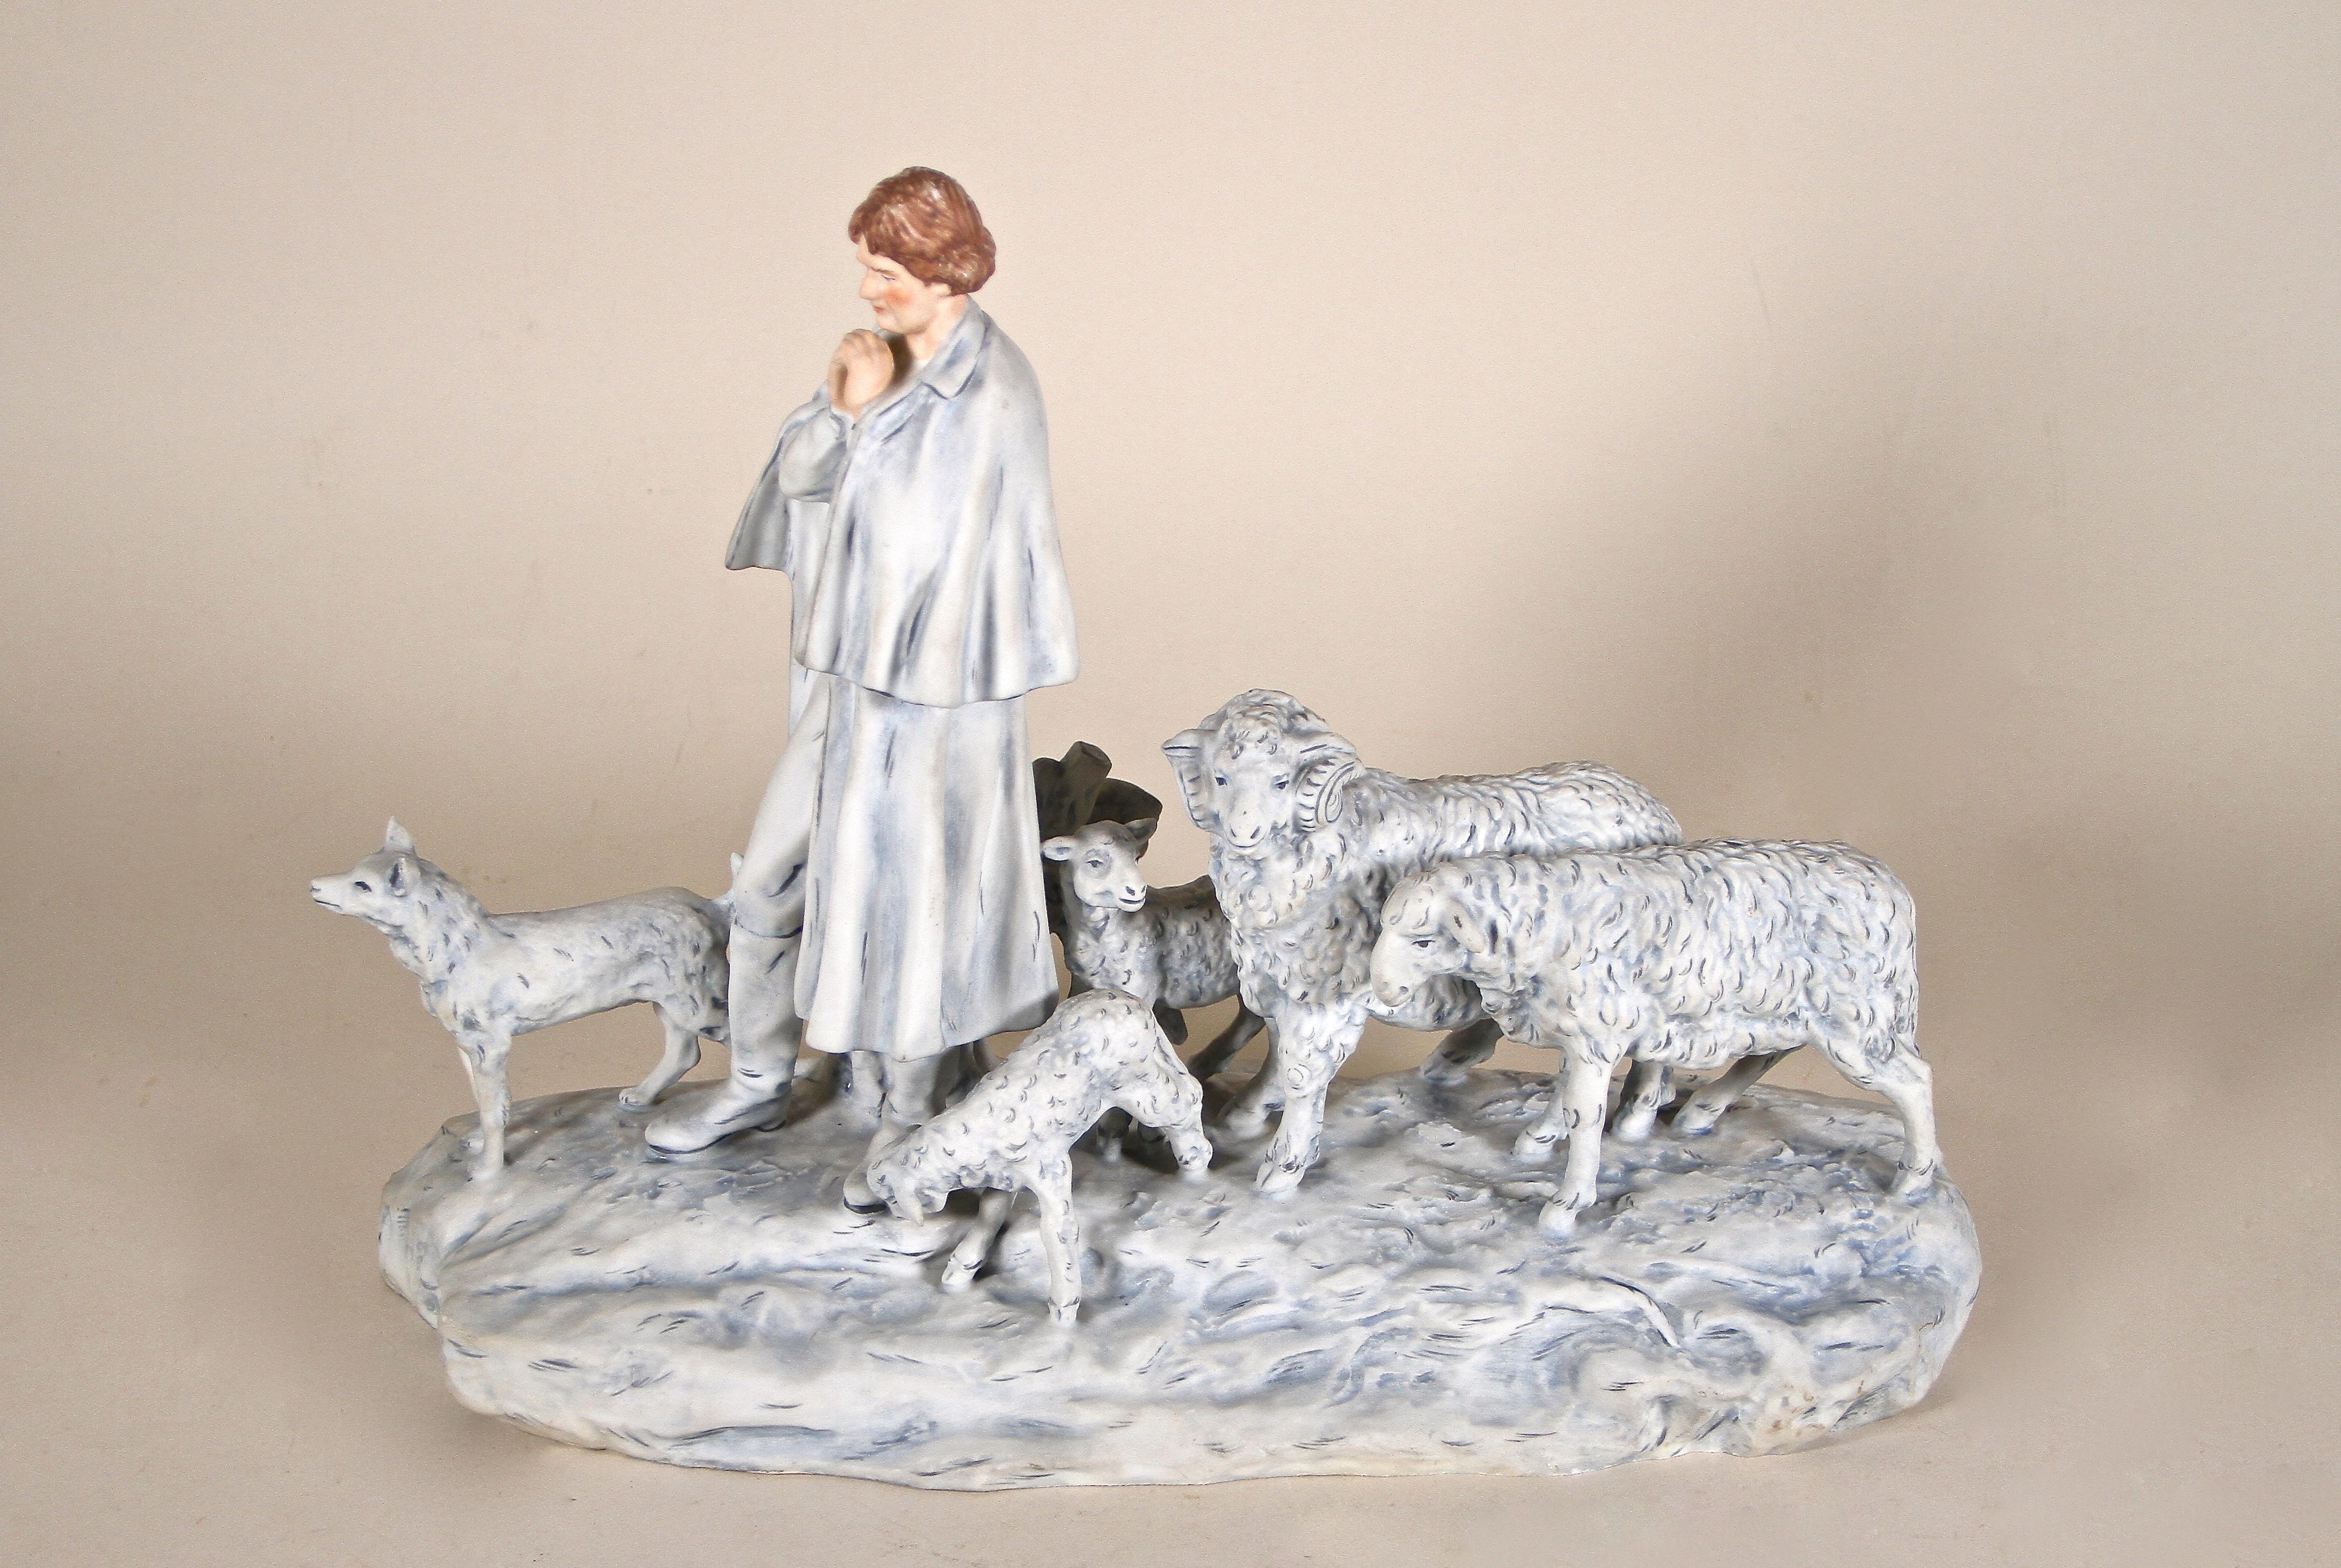 Beautiful Porcelain Sculpture by Royal Dux from the early 20th century depicting a shepherd with his herd. Artfully designed around 1916 by the renown german sculptor Hermann Schubert, it was made in the Czech Republic by the famous company of Royal